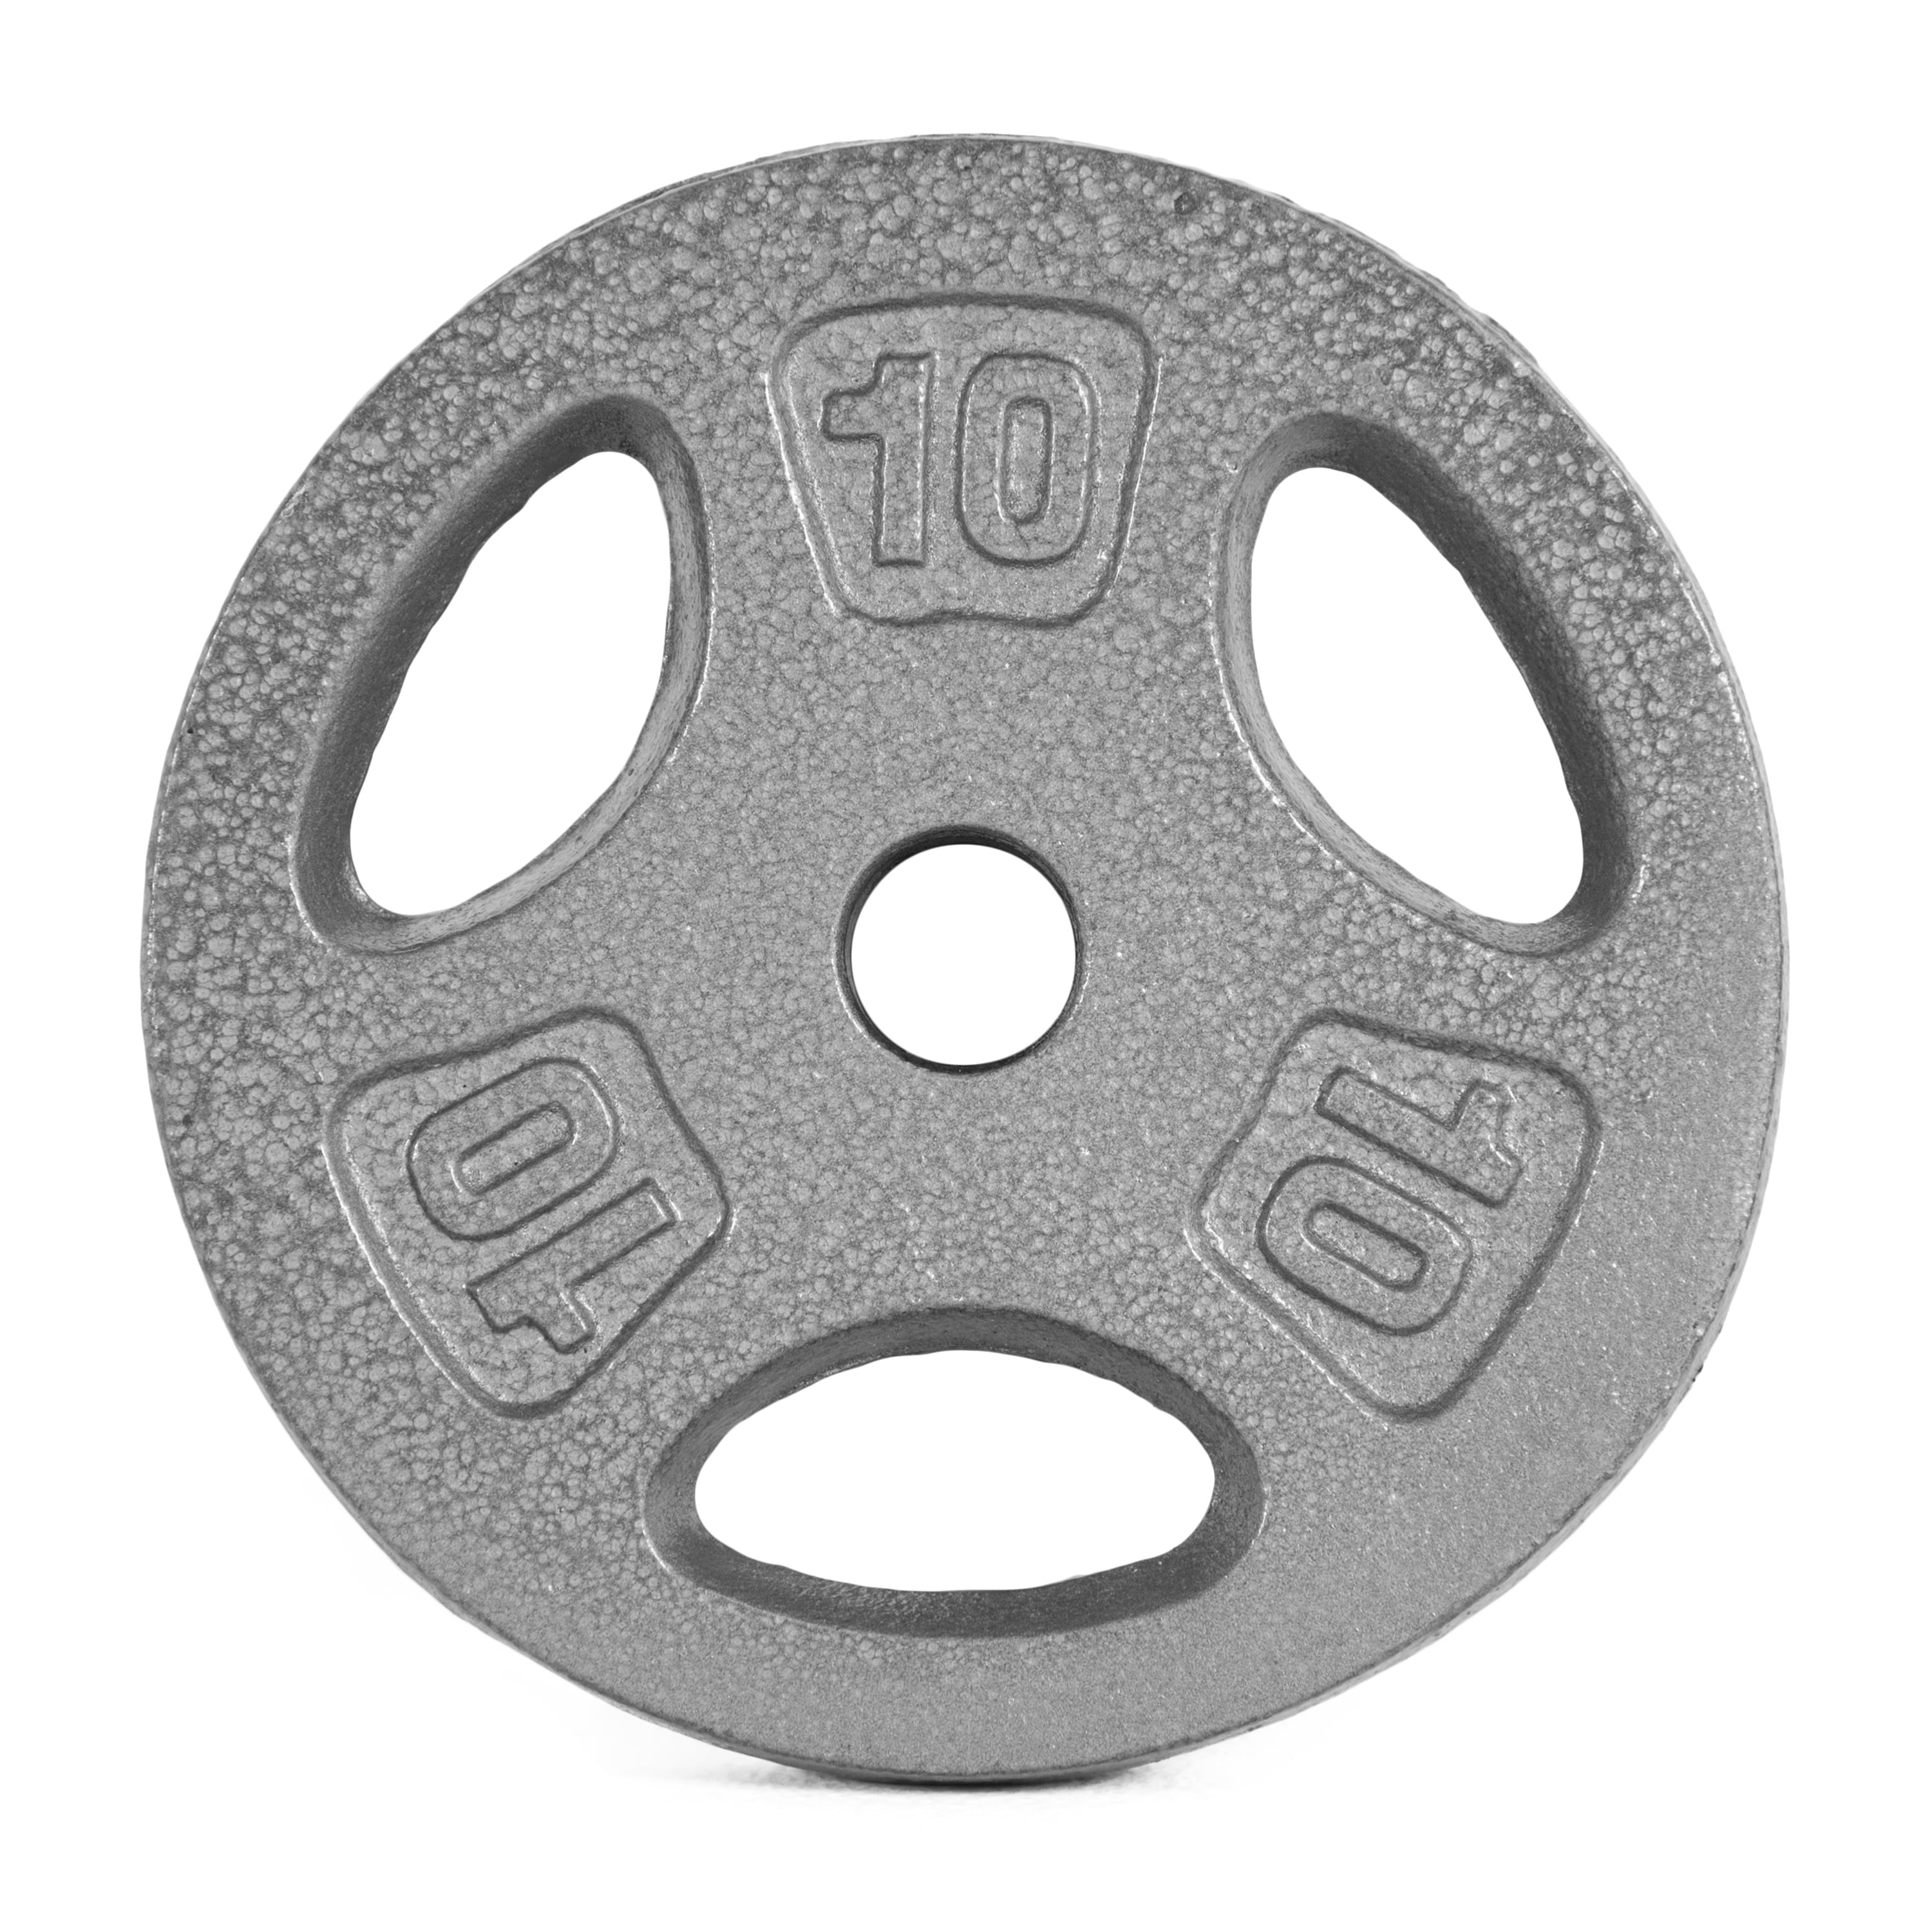 COMES IN PAIRS ONLY 3LB WEIGHT AVAILABLE CAP Dumbbell and barbells plates Sets 